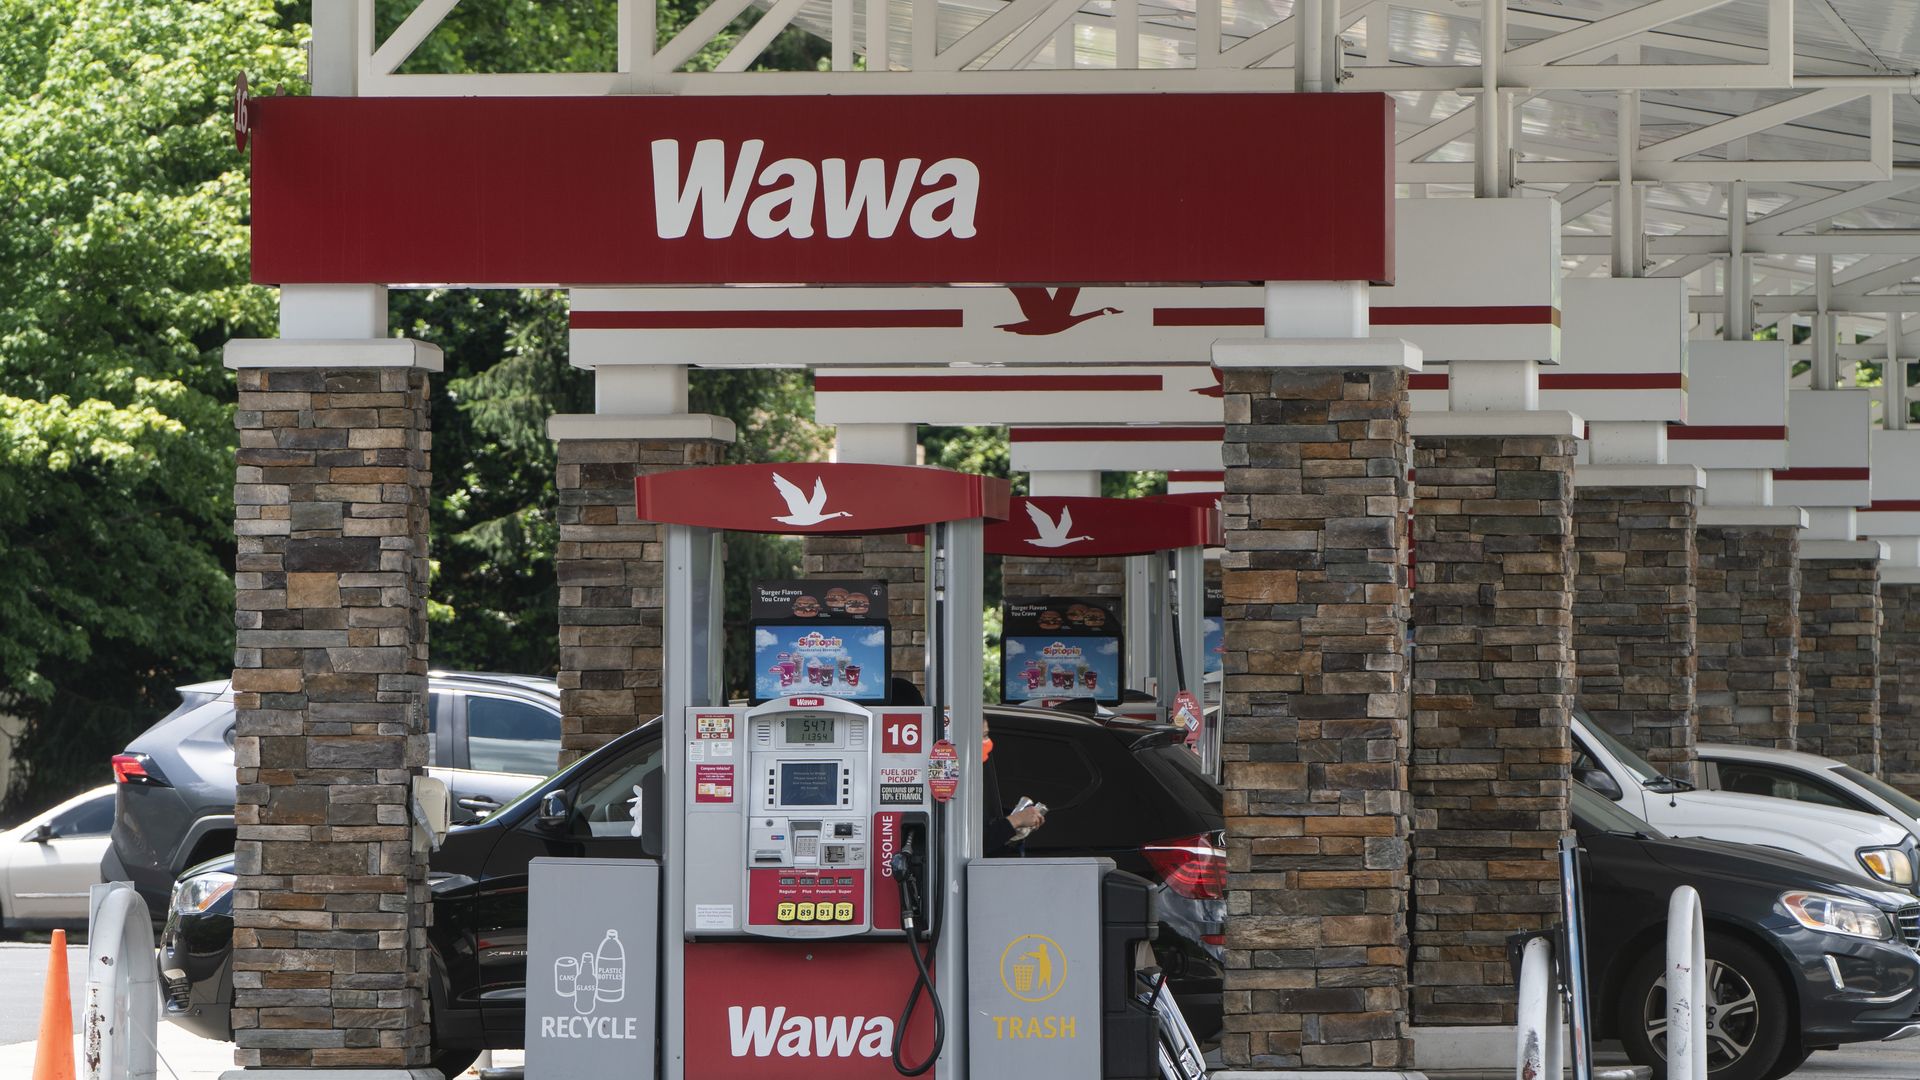 A Wawa gas station is pictured